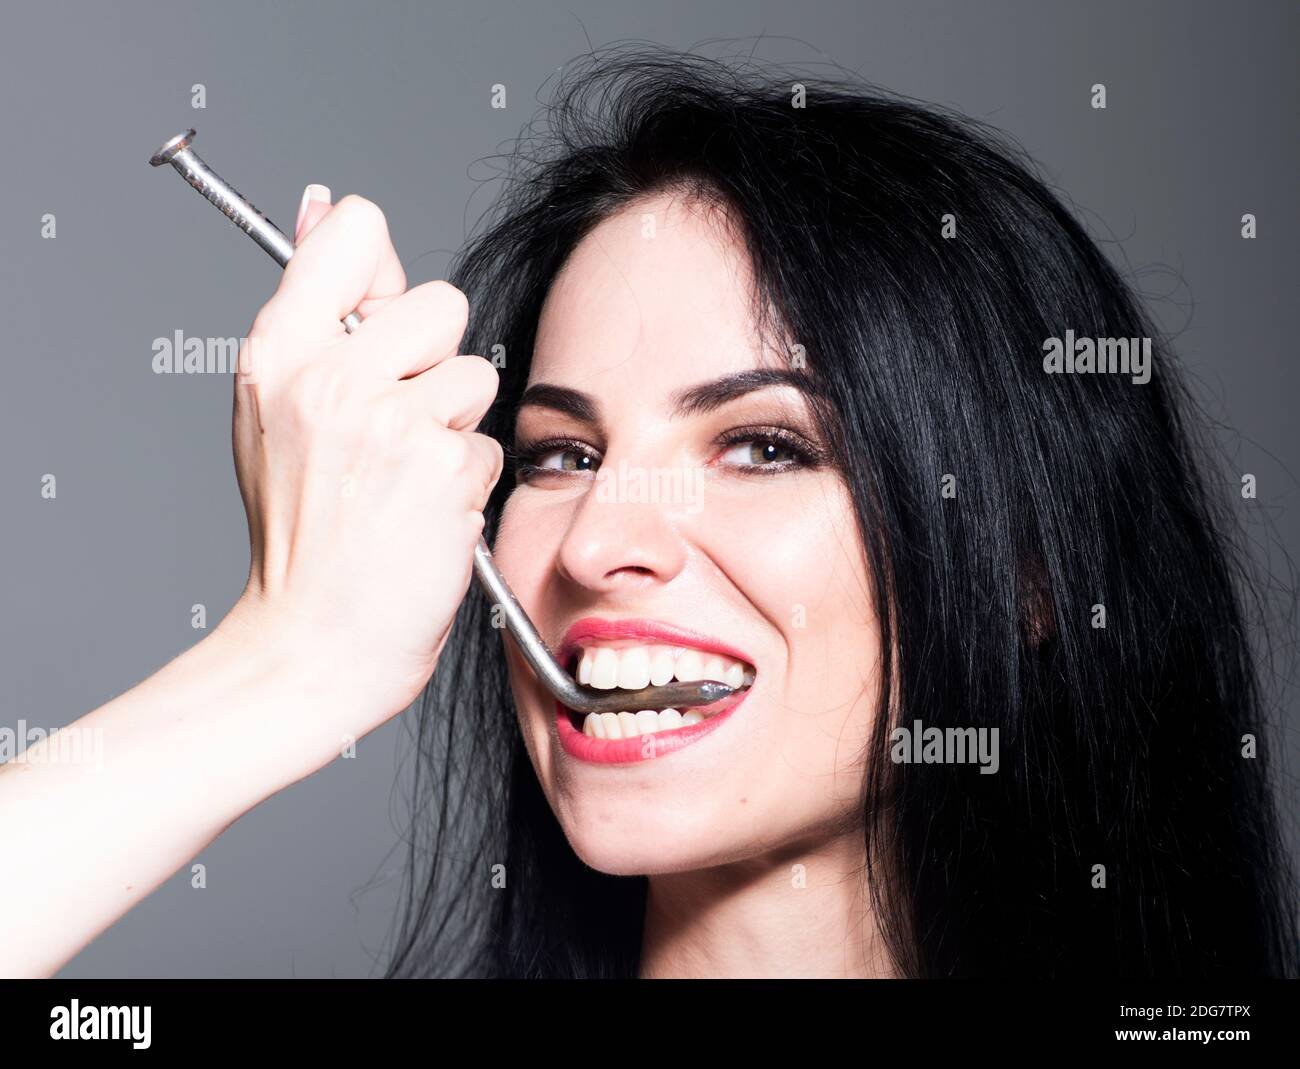 Strong teeth. Closeup of young woman with snow-white smile. Ideal strong white teeth, teethcare. Healthcare, stomatological concept for dentists. Girl Stock Photo